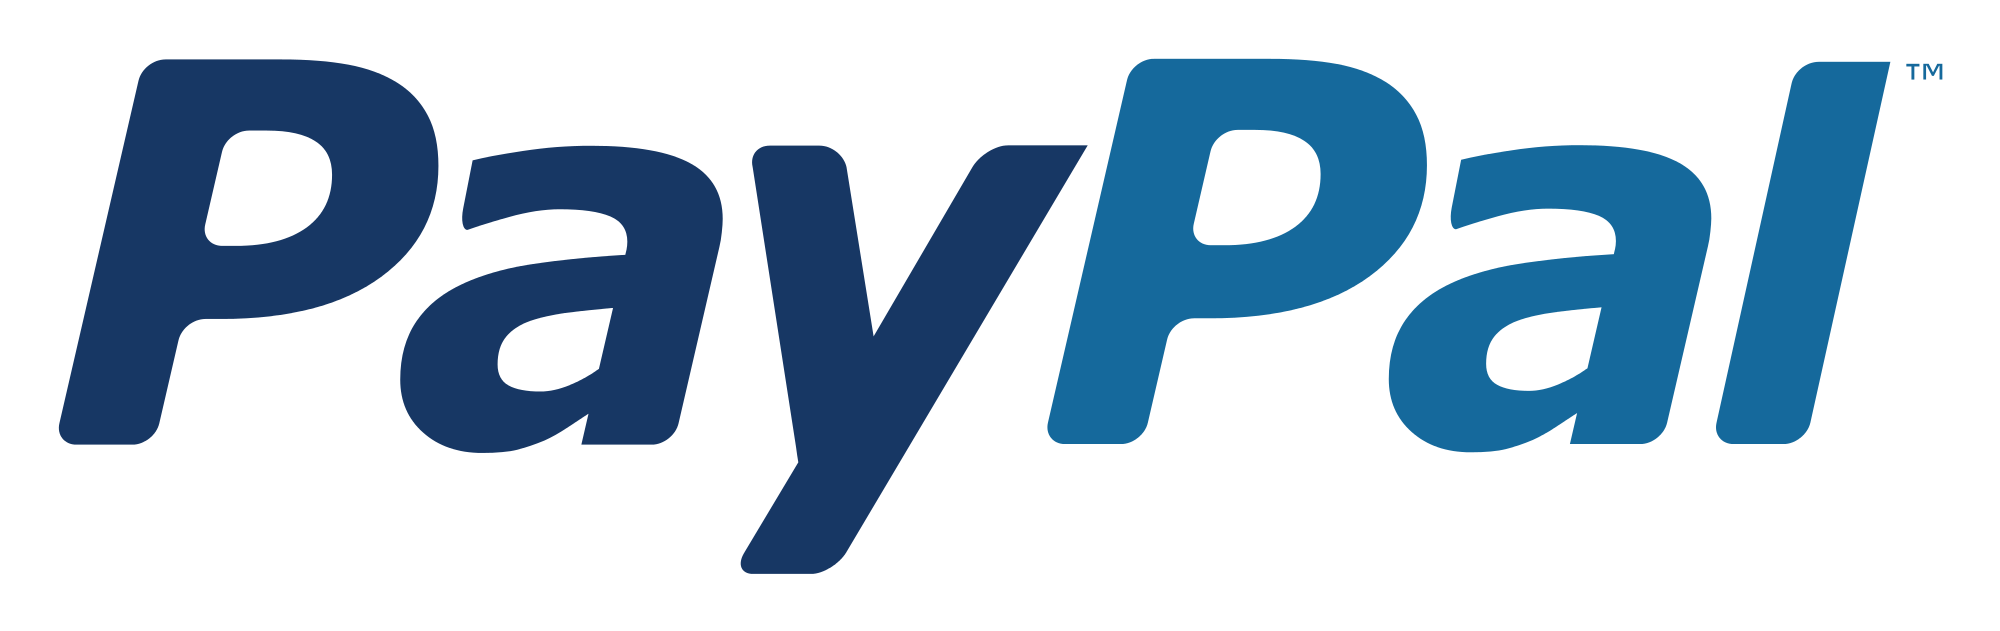 PayPal2007.svg